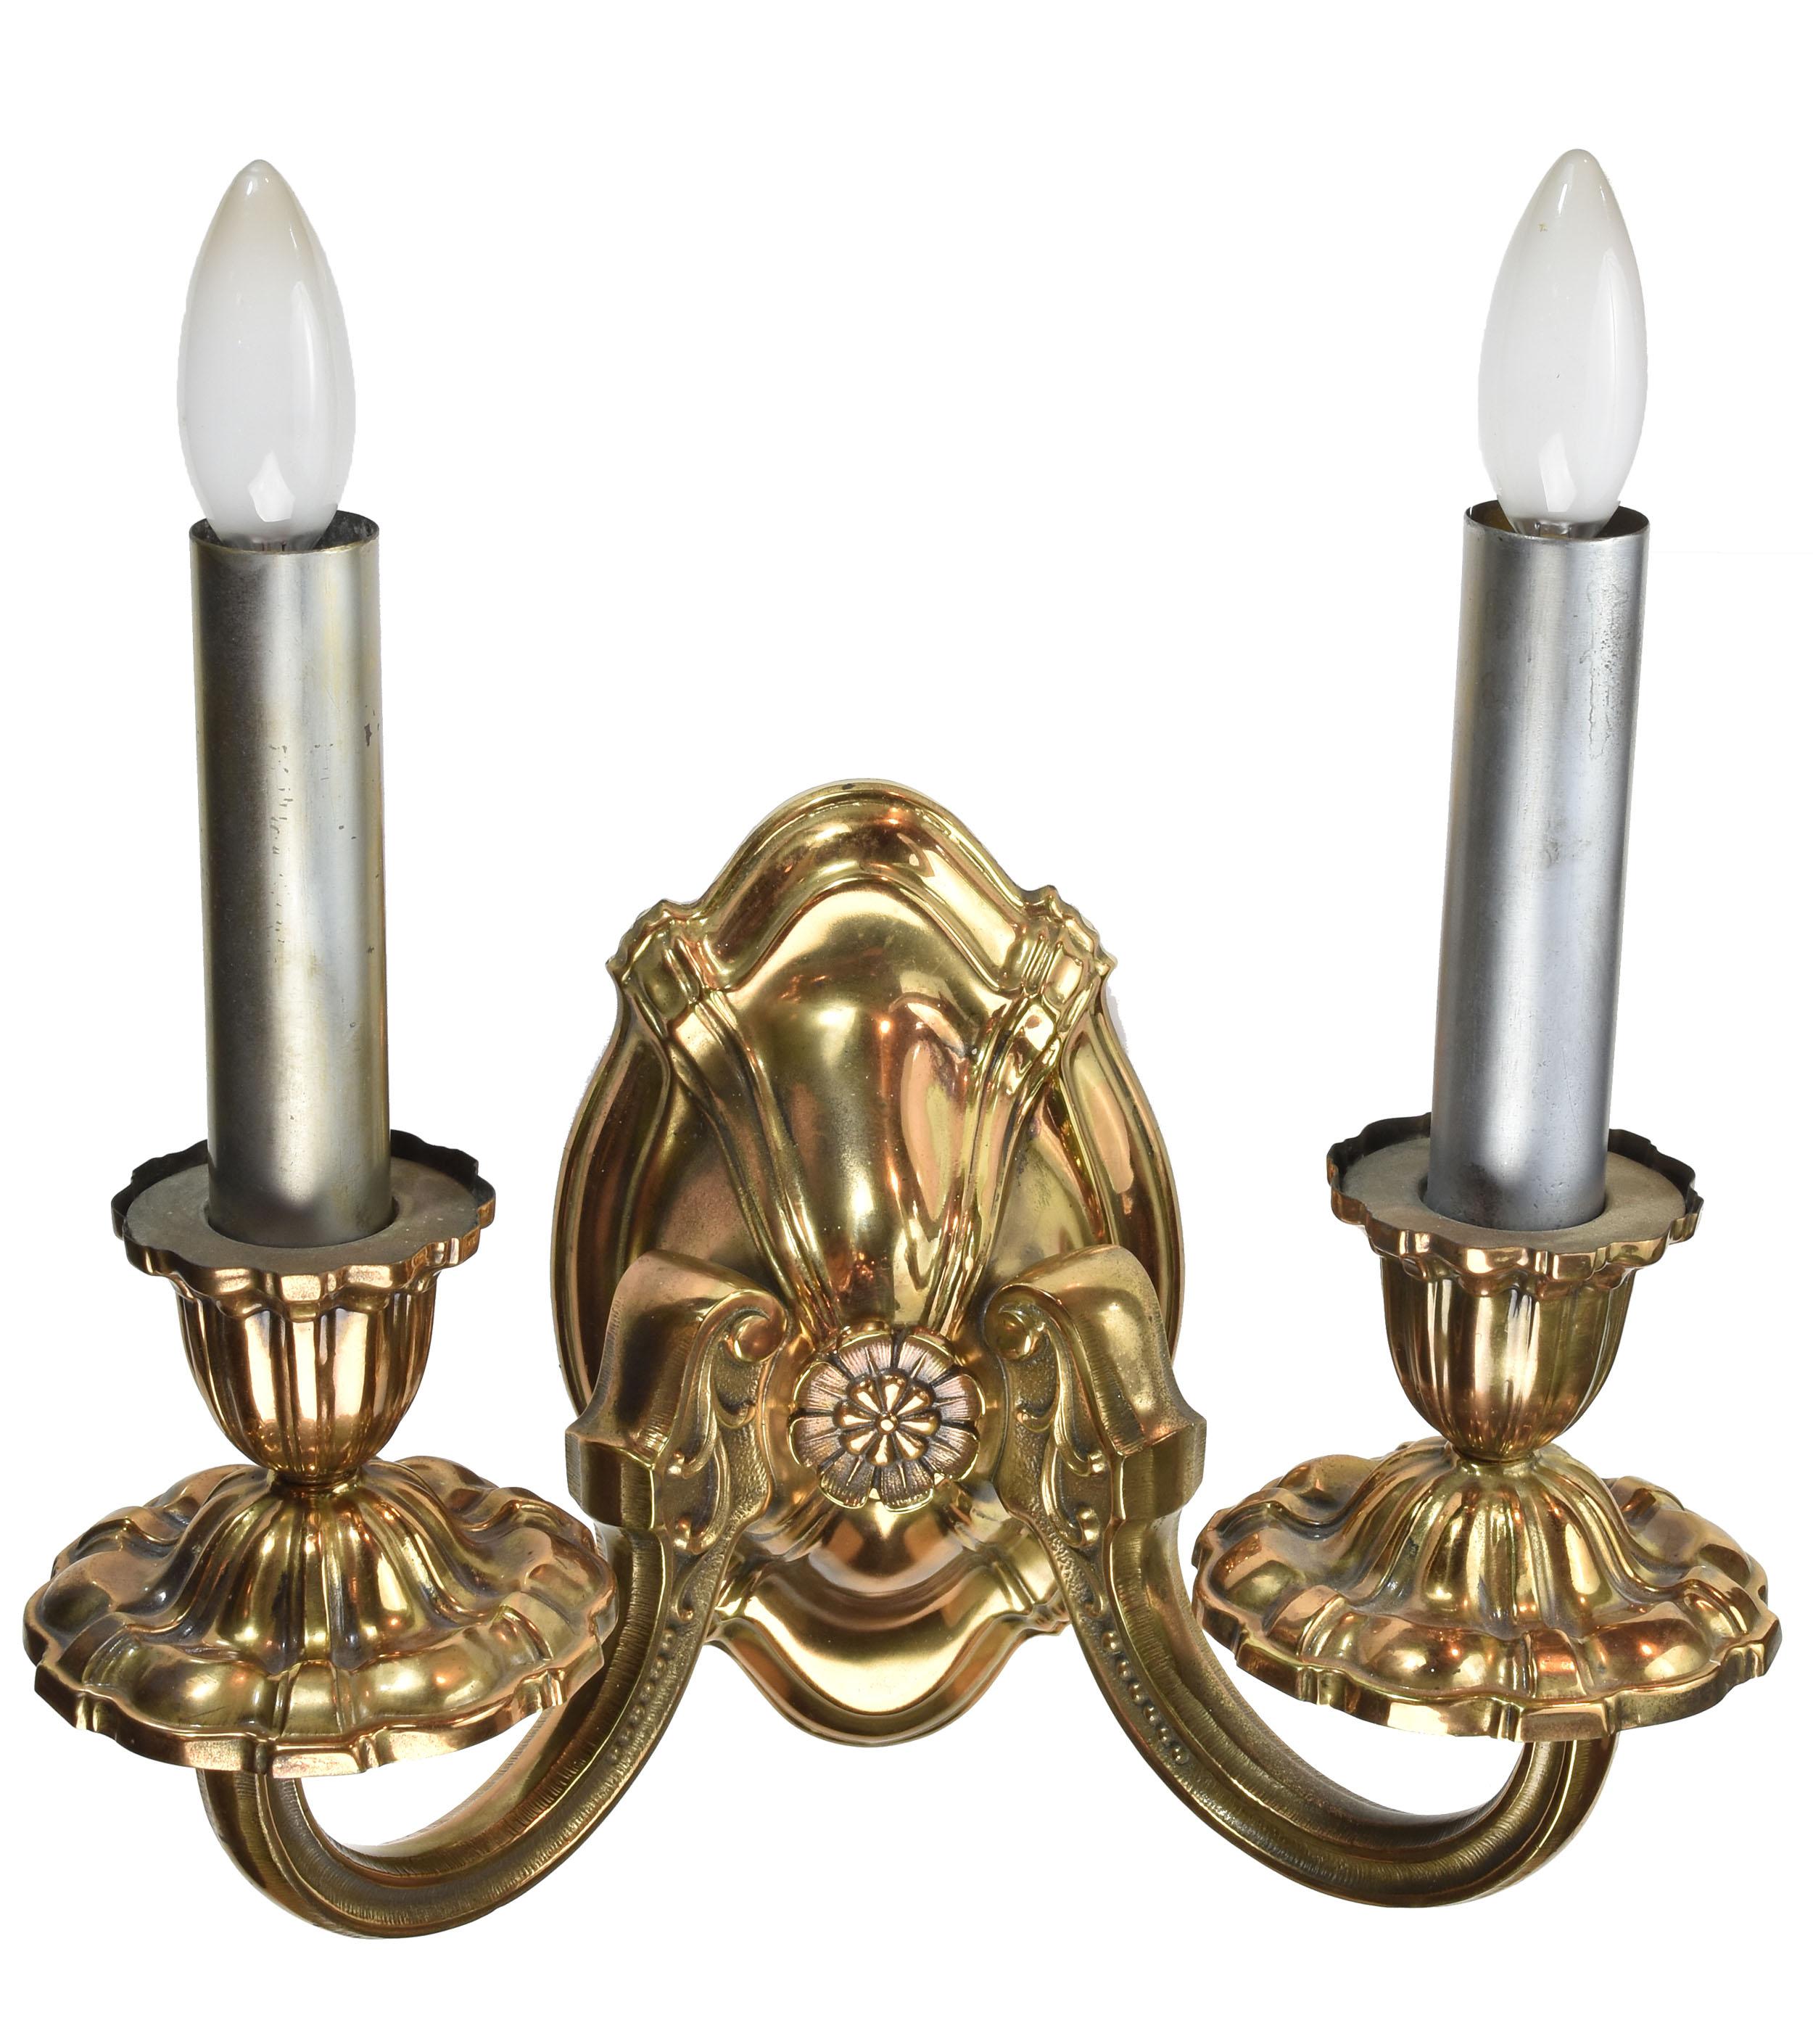 Lovely cast brass sconces. The curves and shine on this sconce keep your eye constantly moving while you’re able to rest your eye on the centre flower. This sconce is beautifully symmetrical and you’re able to appreciate it fully at eye height when